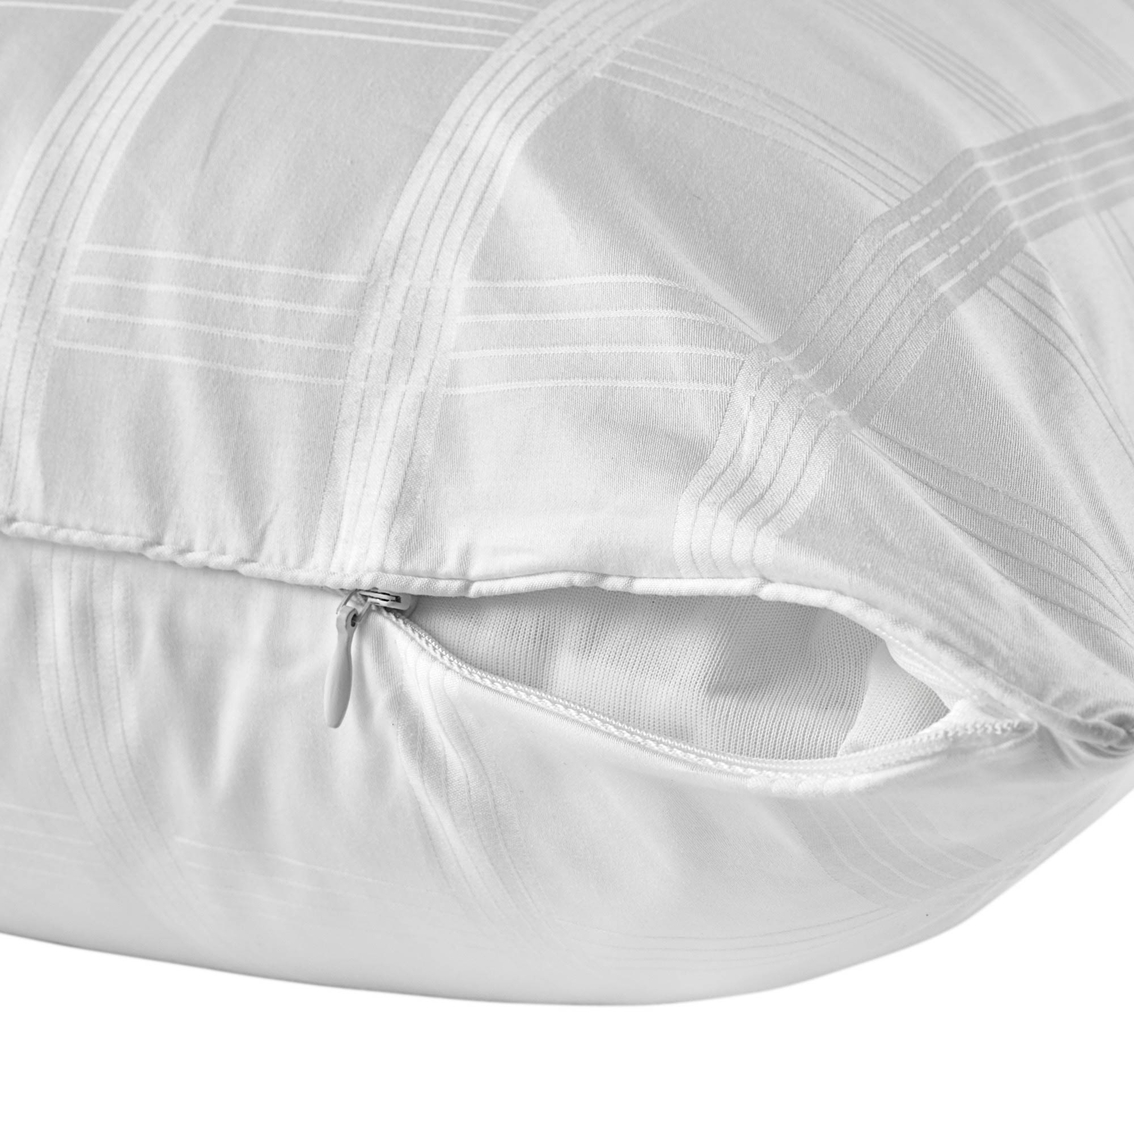 Sealy Luxury Cotton Pillow Protector - Image 5 of 7